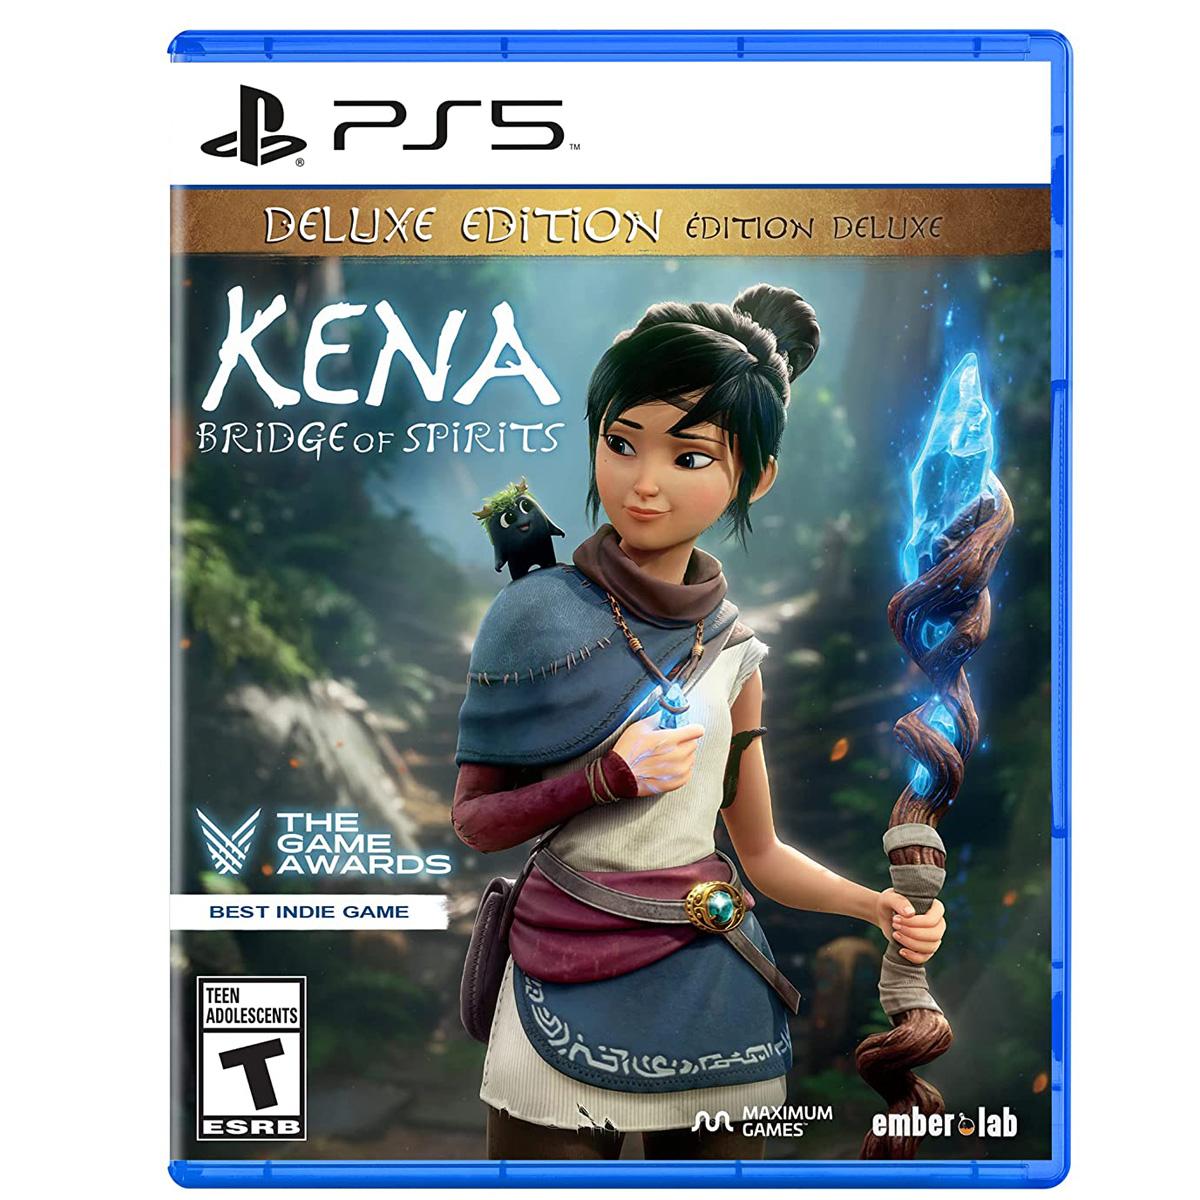 Kena Bridge of Spirits Deluxe Edition PS4 PS5 for $29.99 Shipped